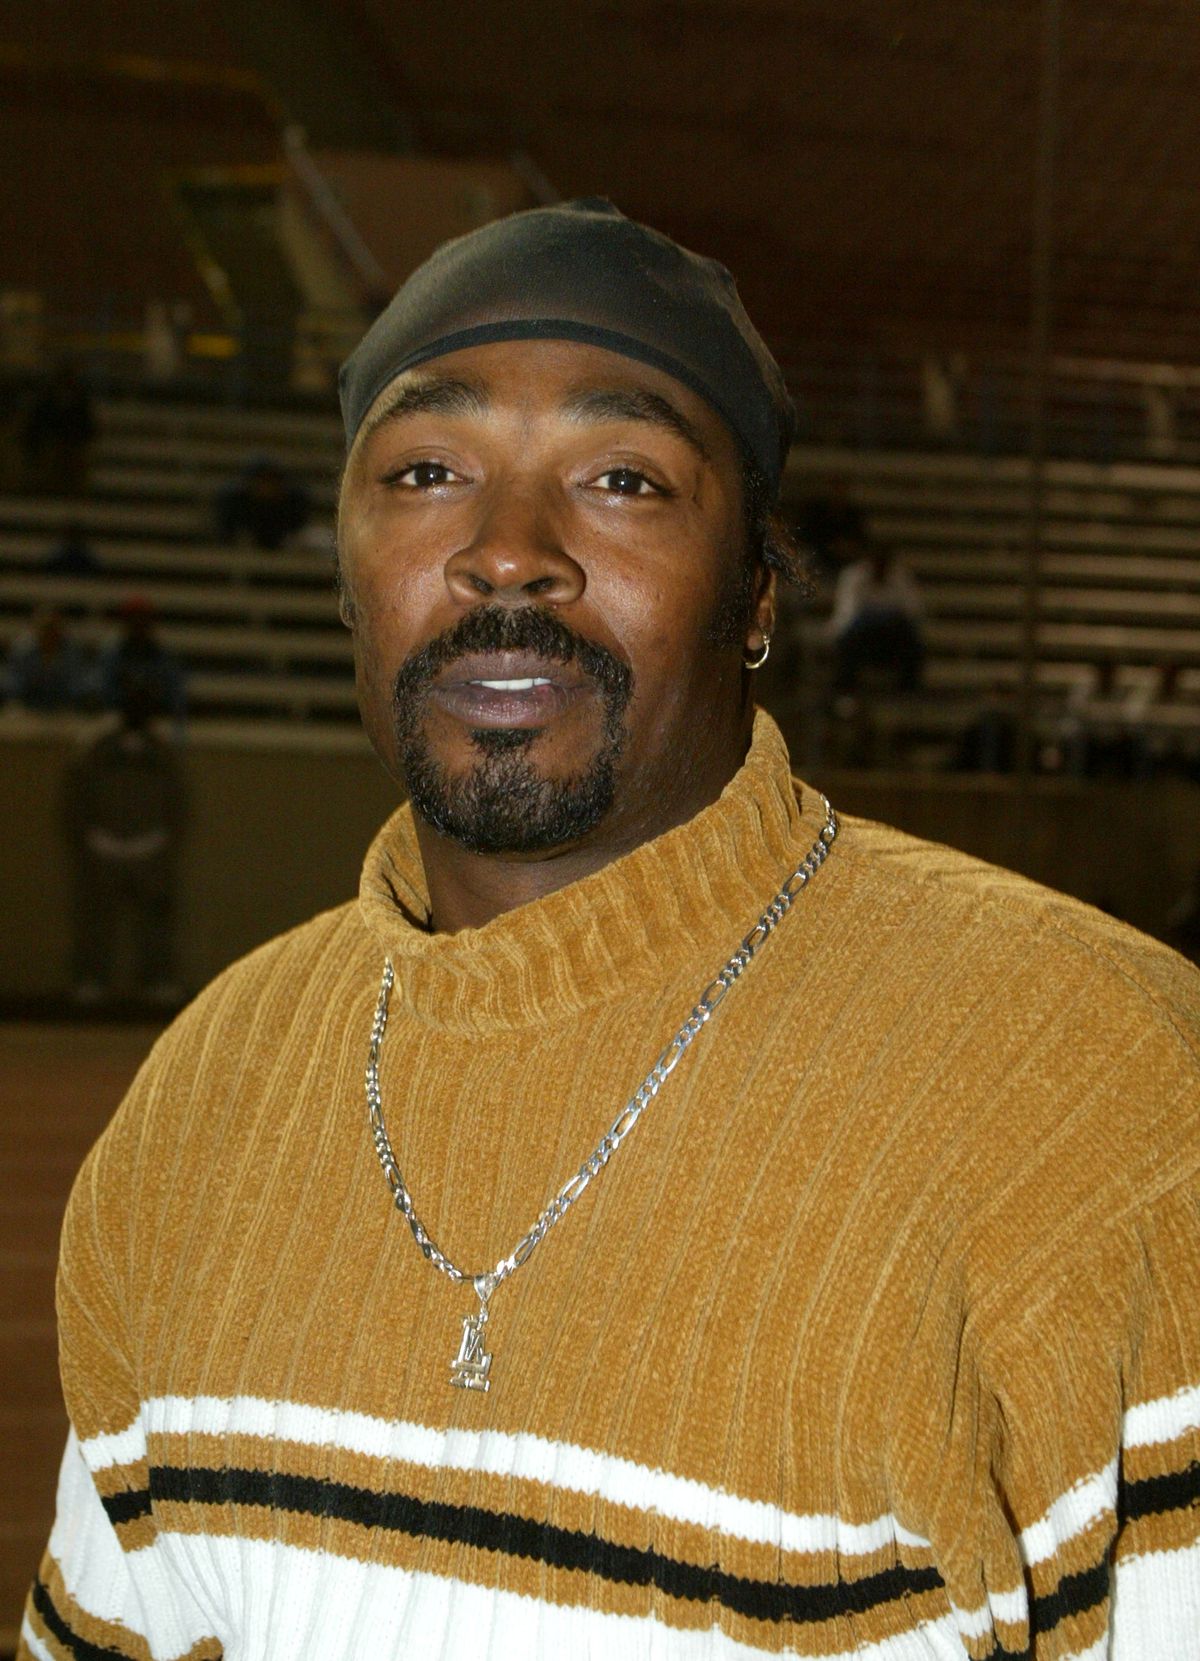 Rodney King at 1st Annual Snoop bowl fundraiser football game